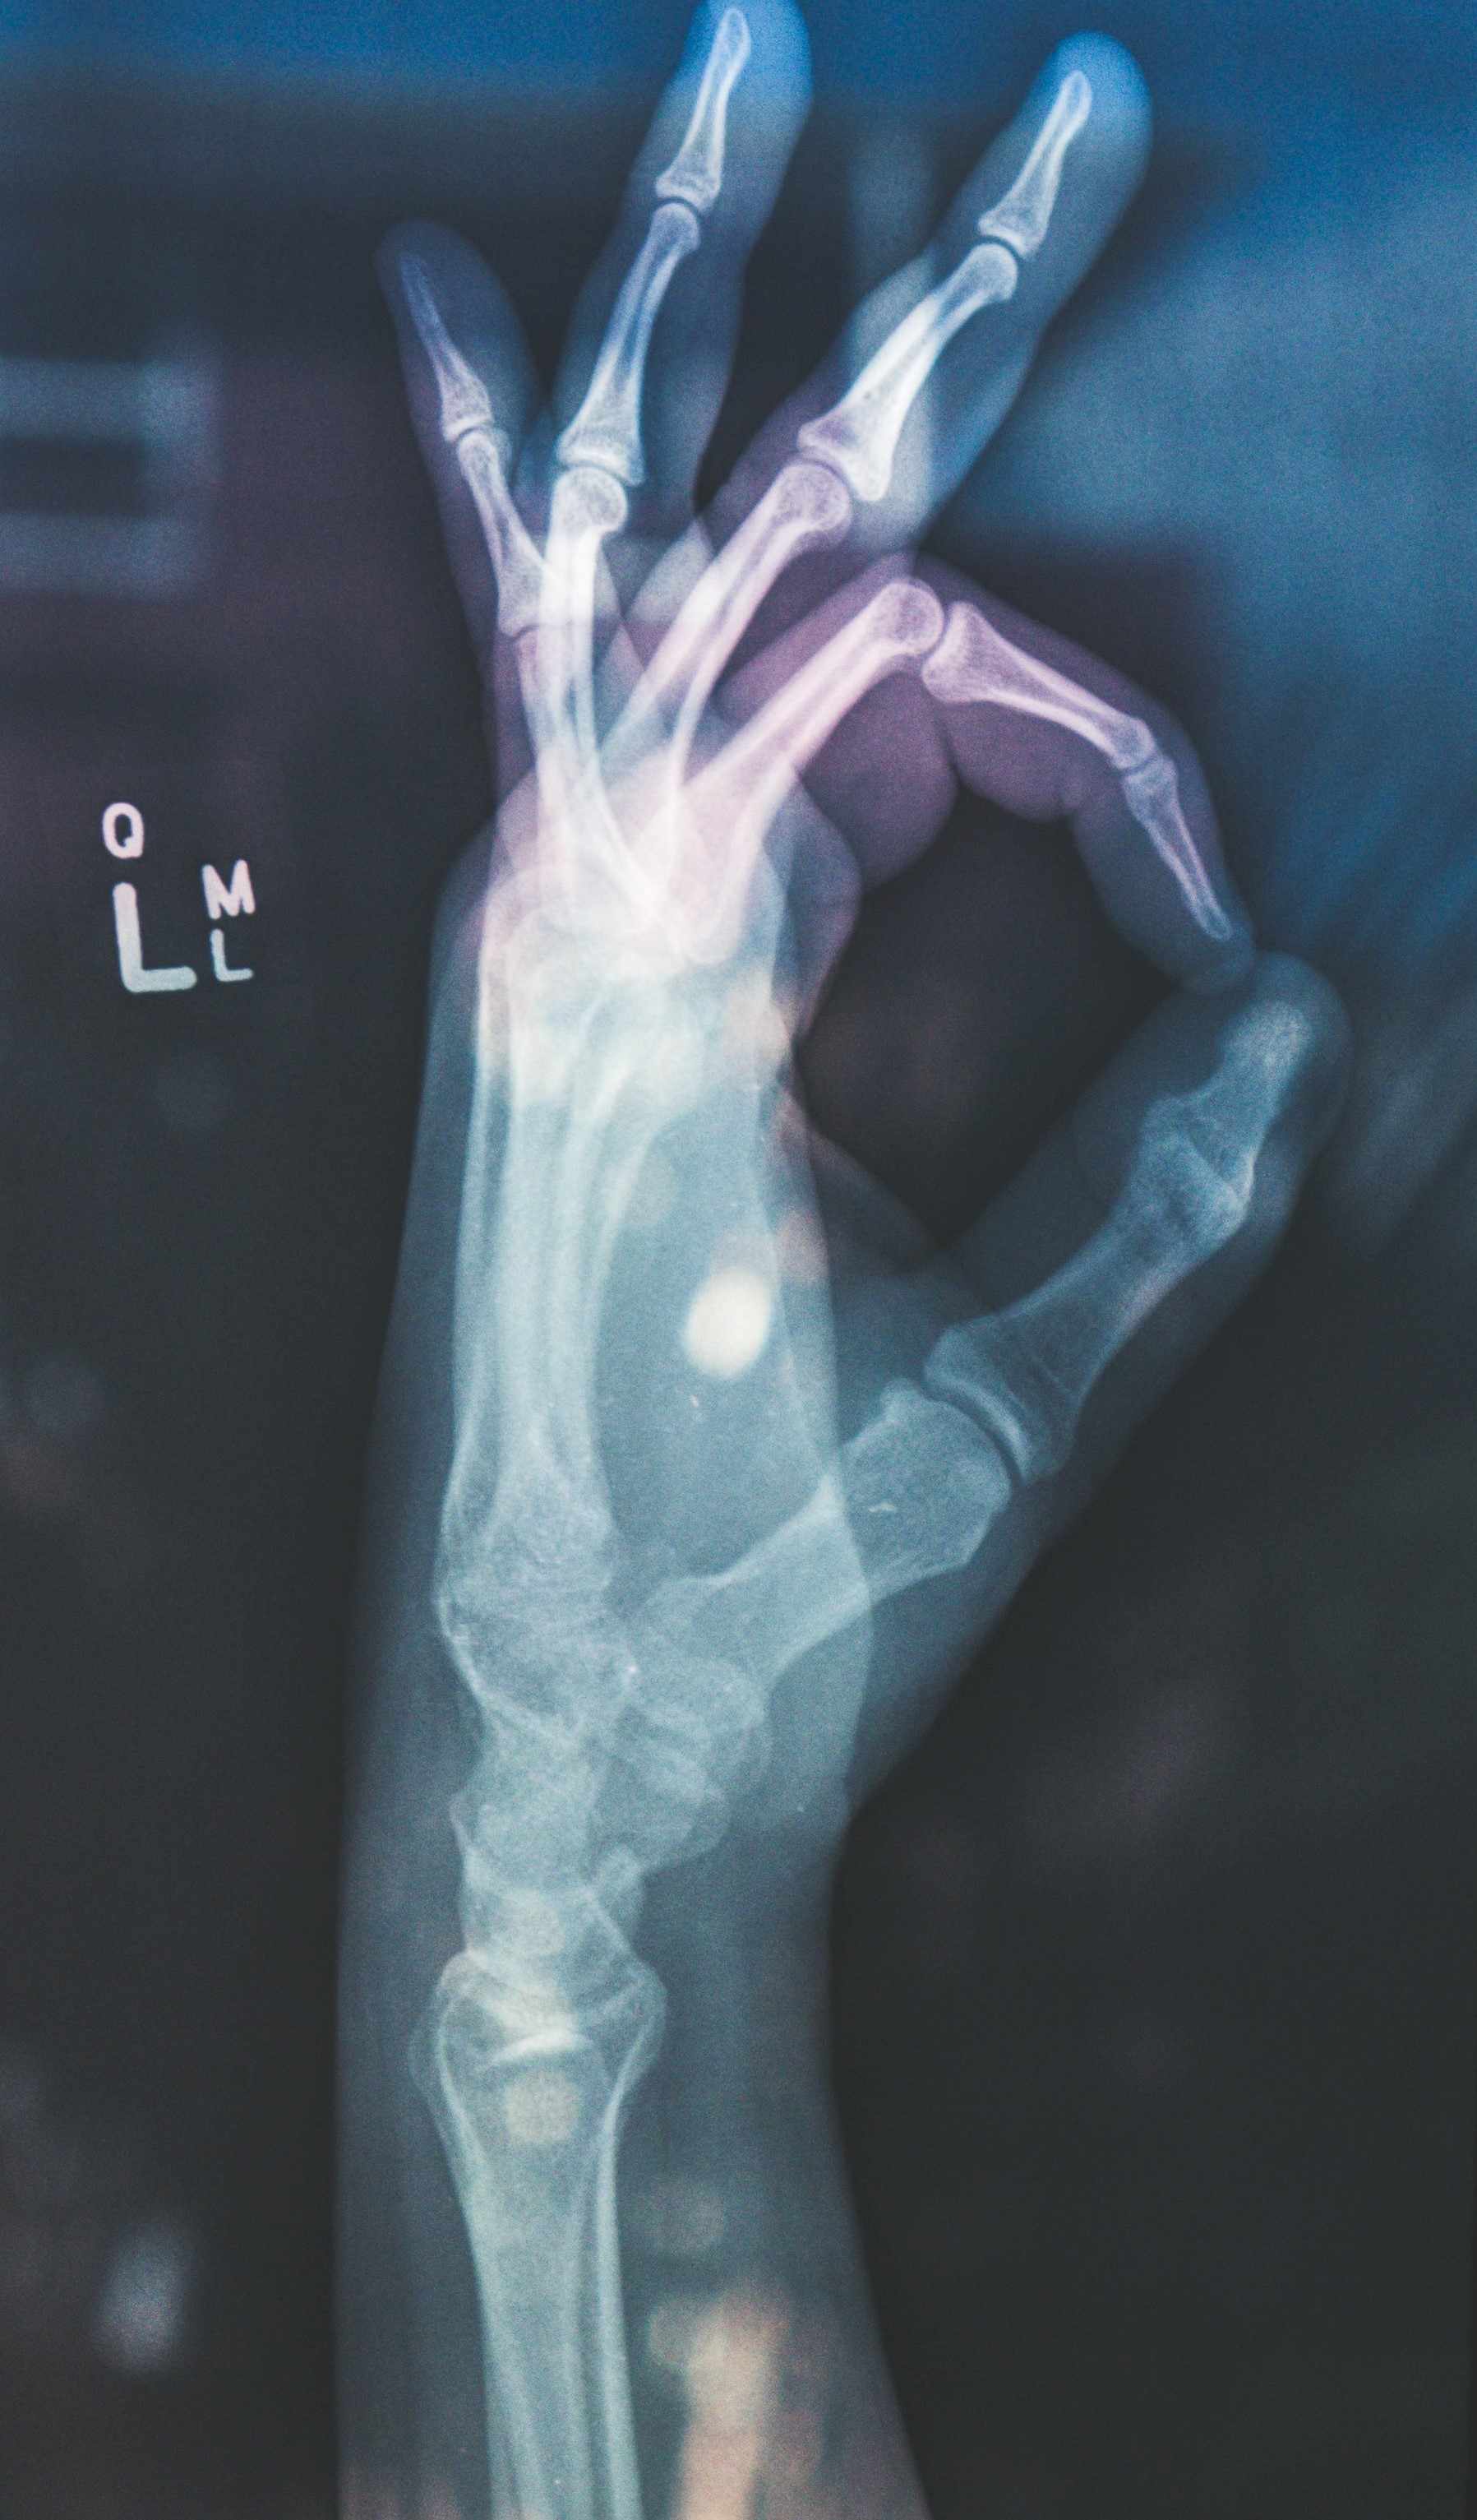 X-rayed hands showing the "OK" sign